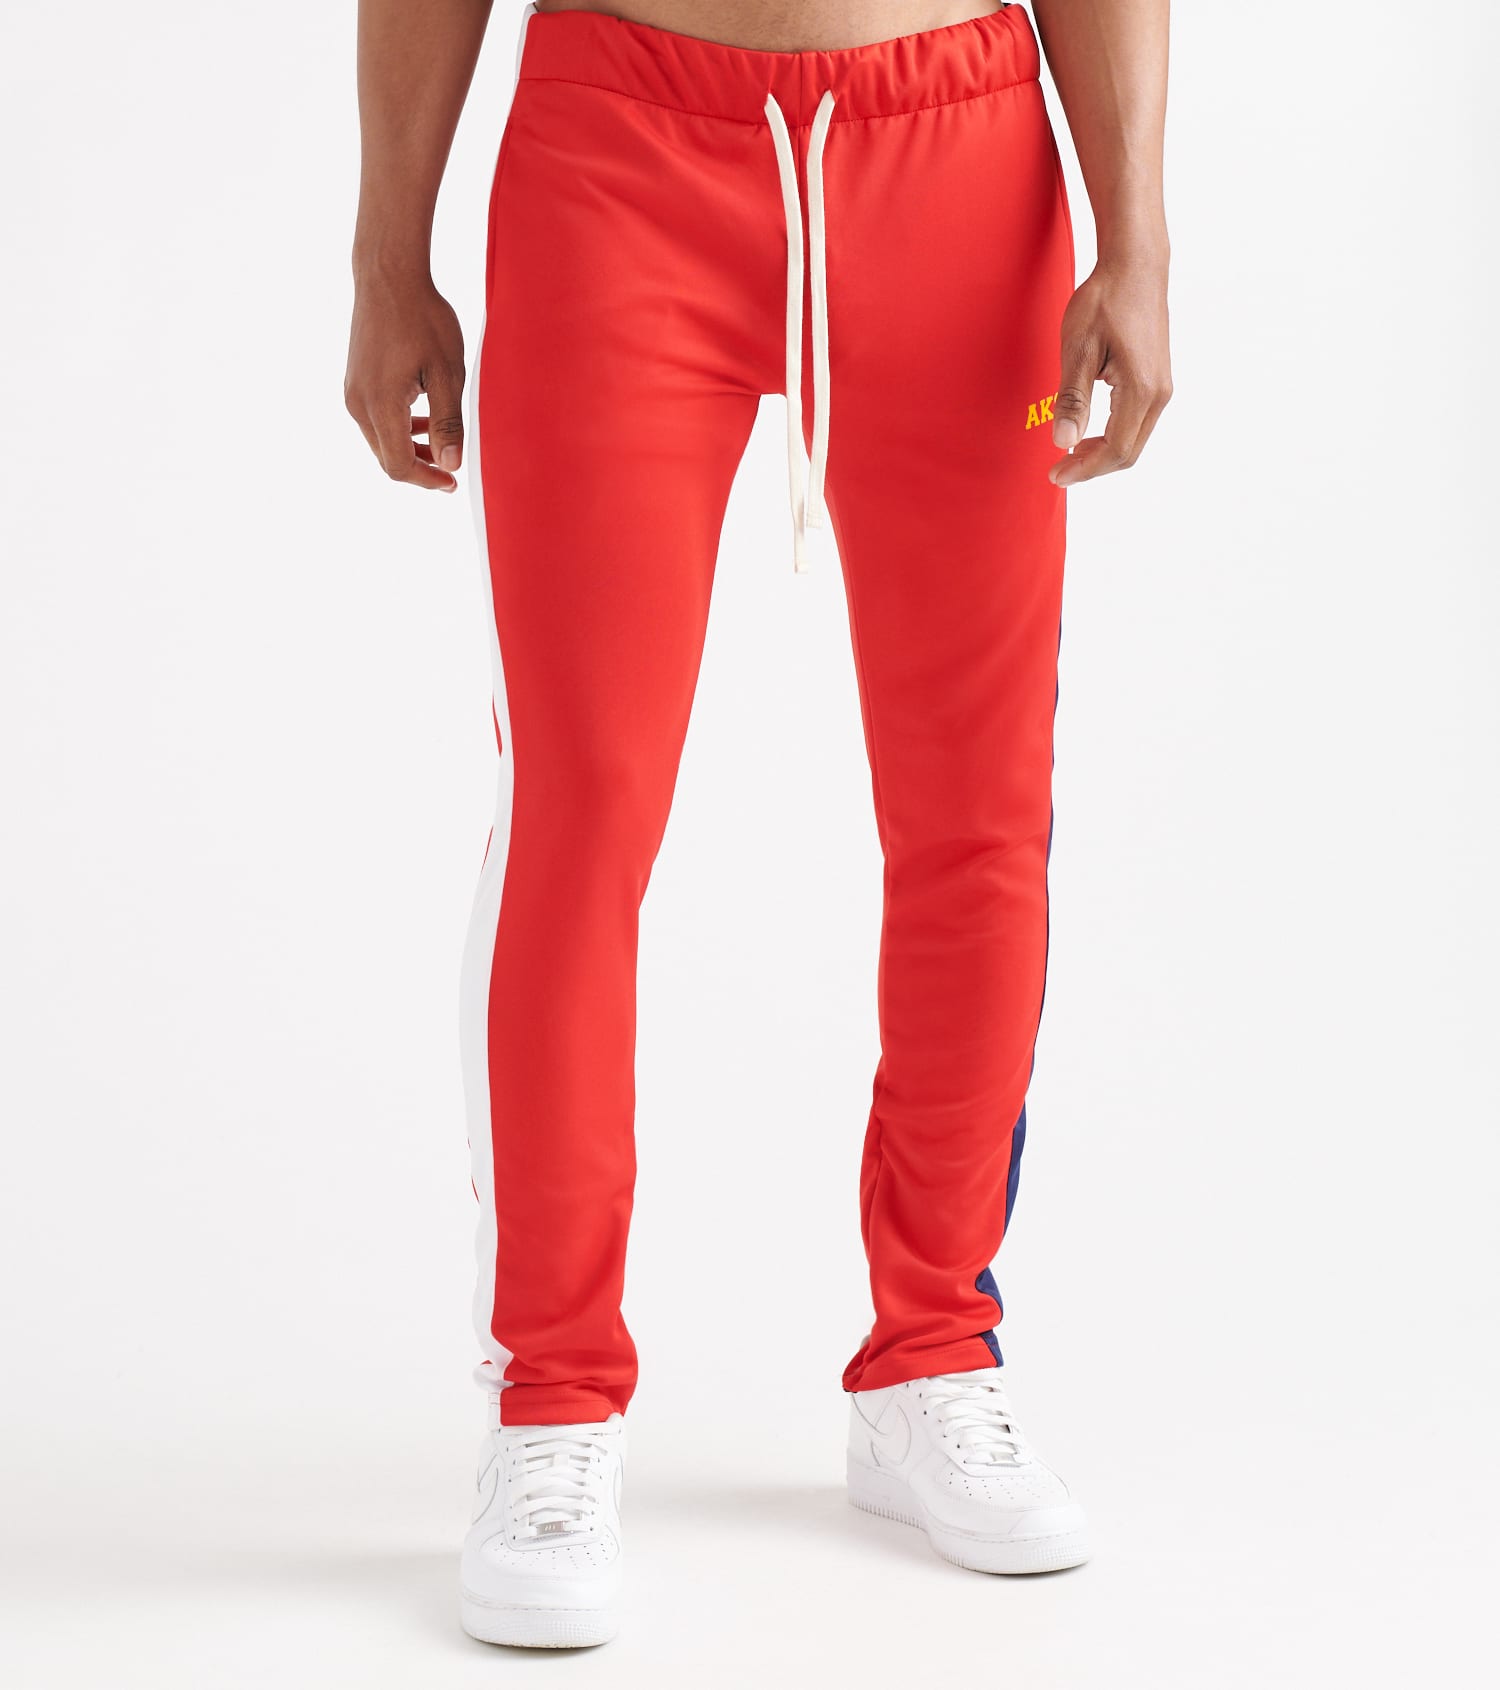 A.K.O.O. Tri-Crown Track Pants (Red) - 7912110-RED | Jimmy Jazz